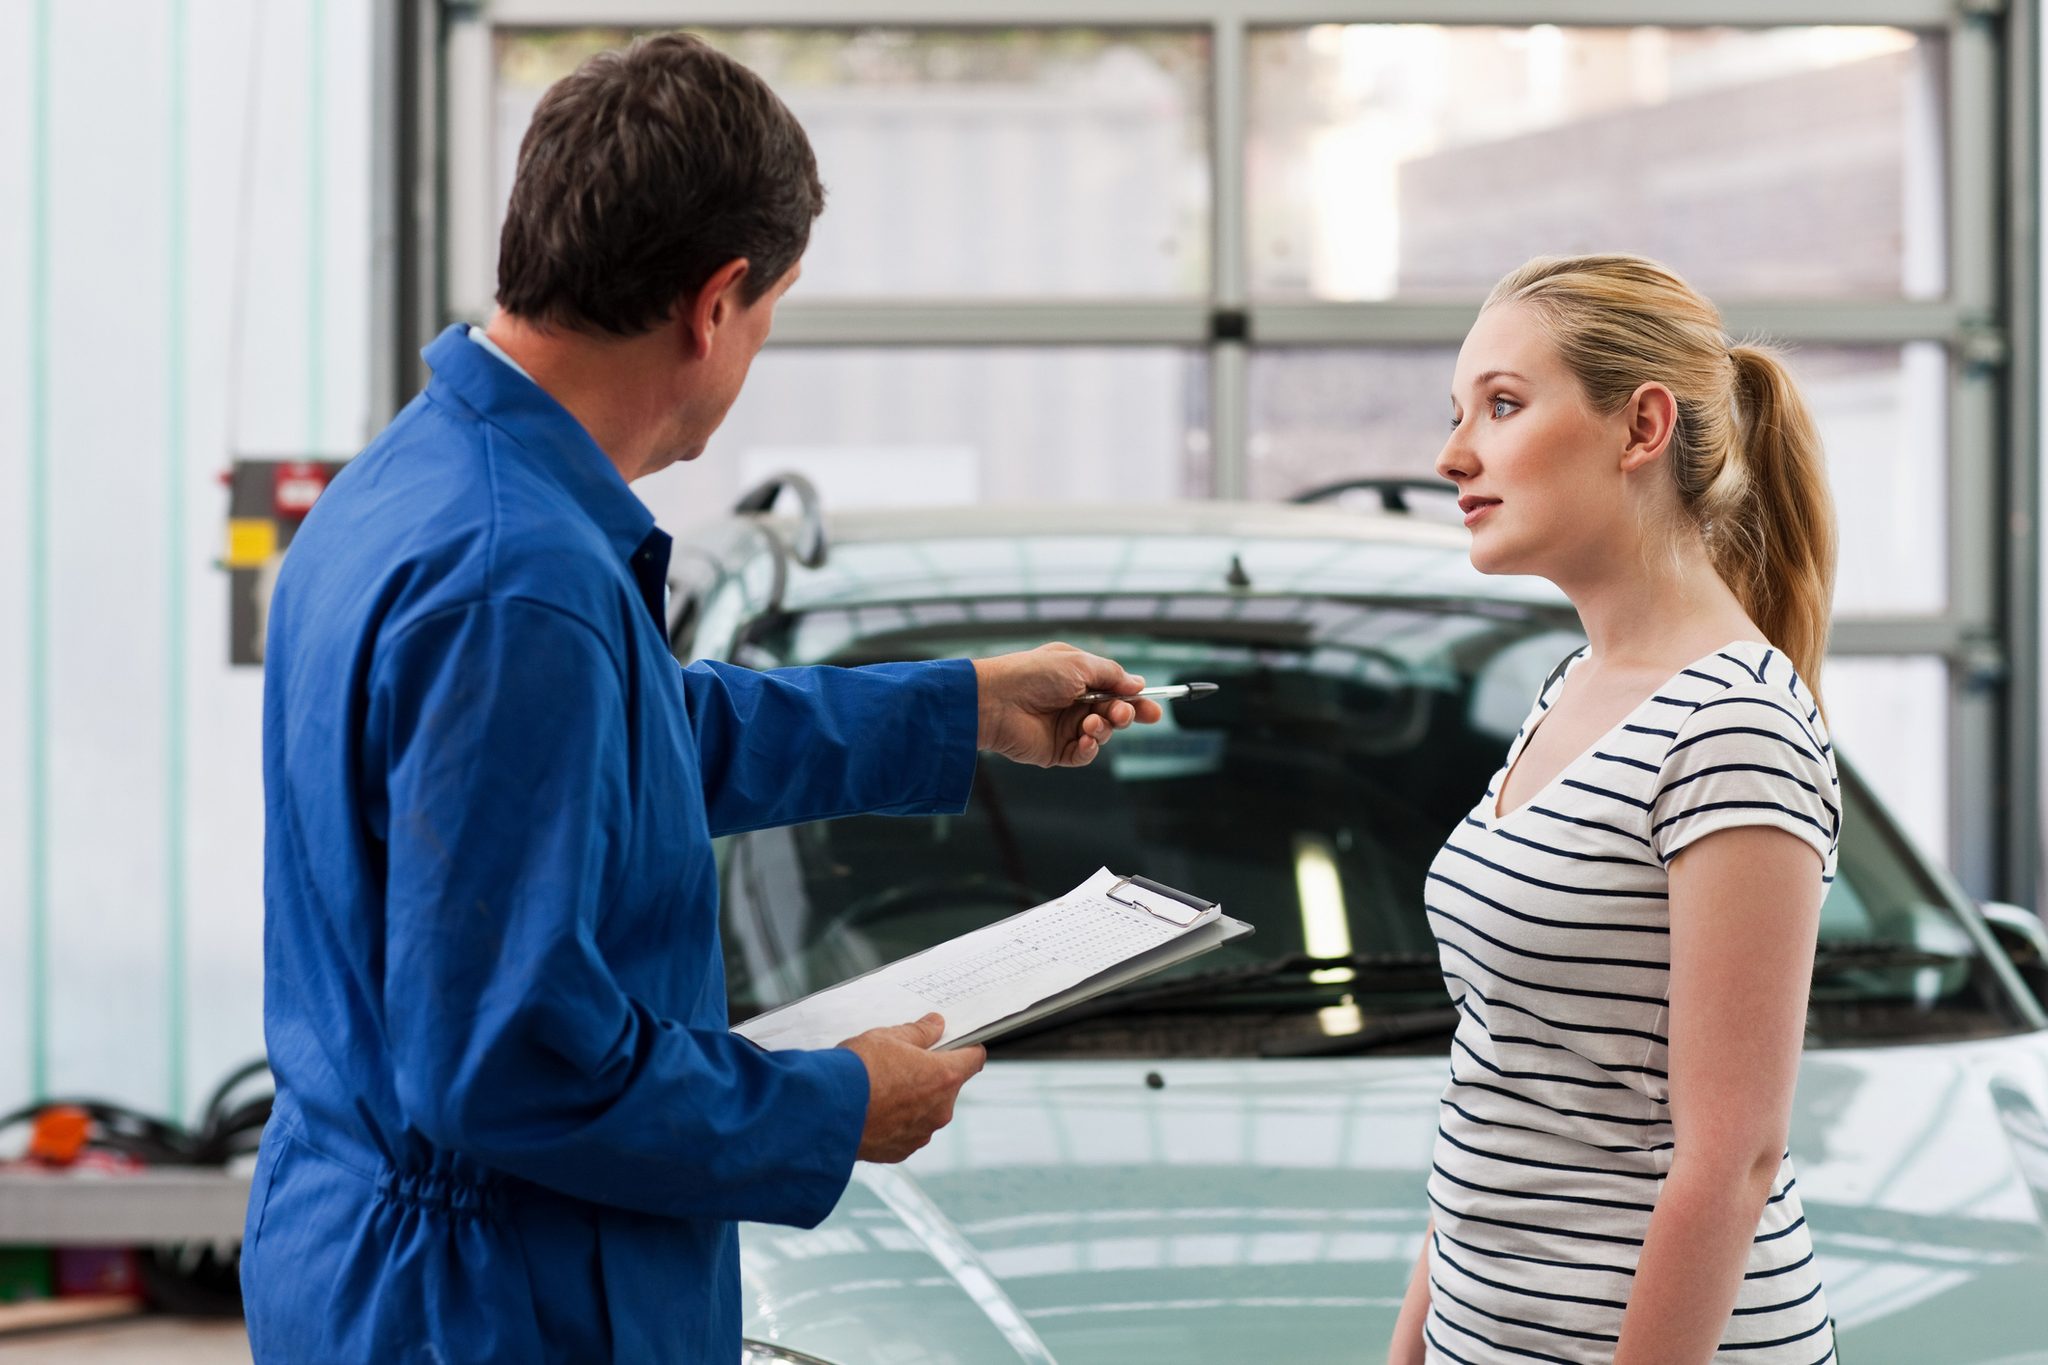 Questions to Ask Mechanics Before They Work on a Car | Reader's Digest